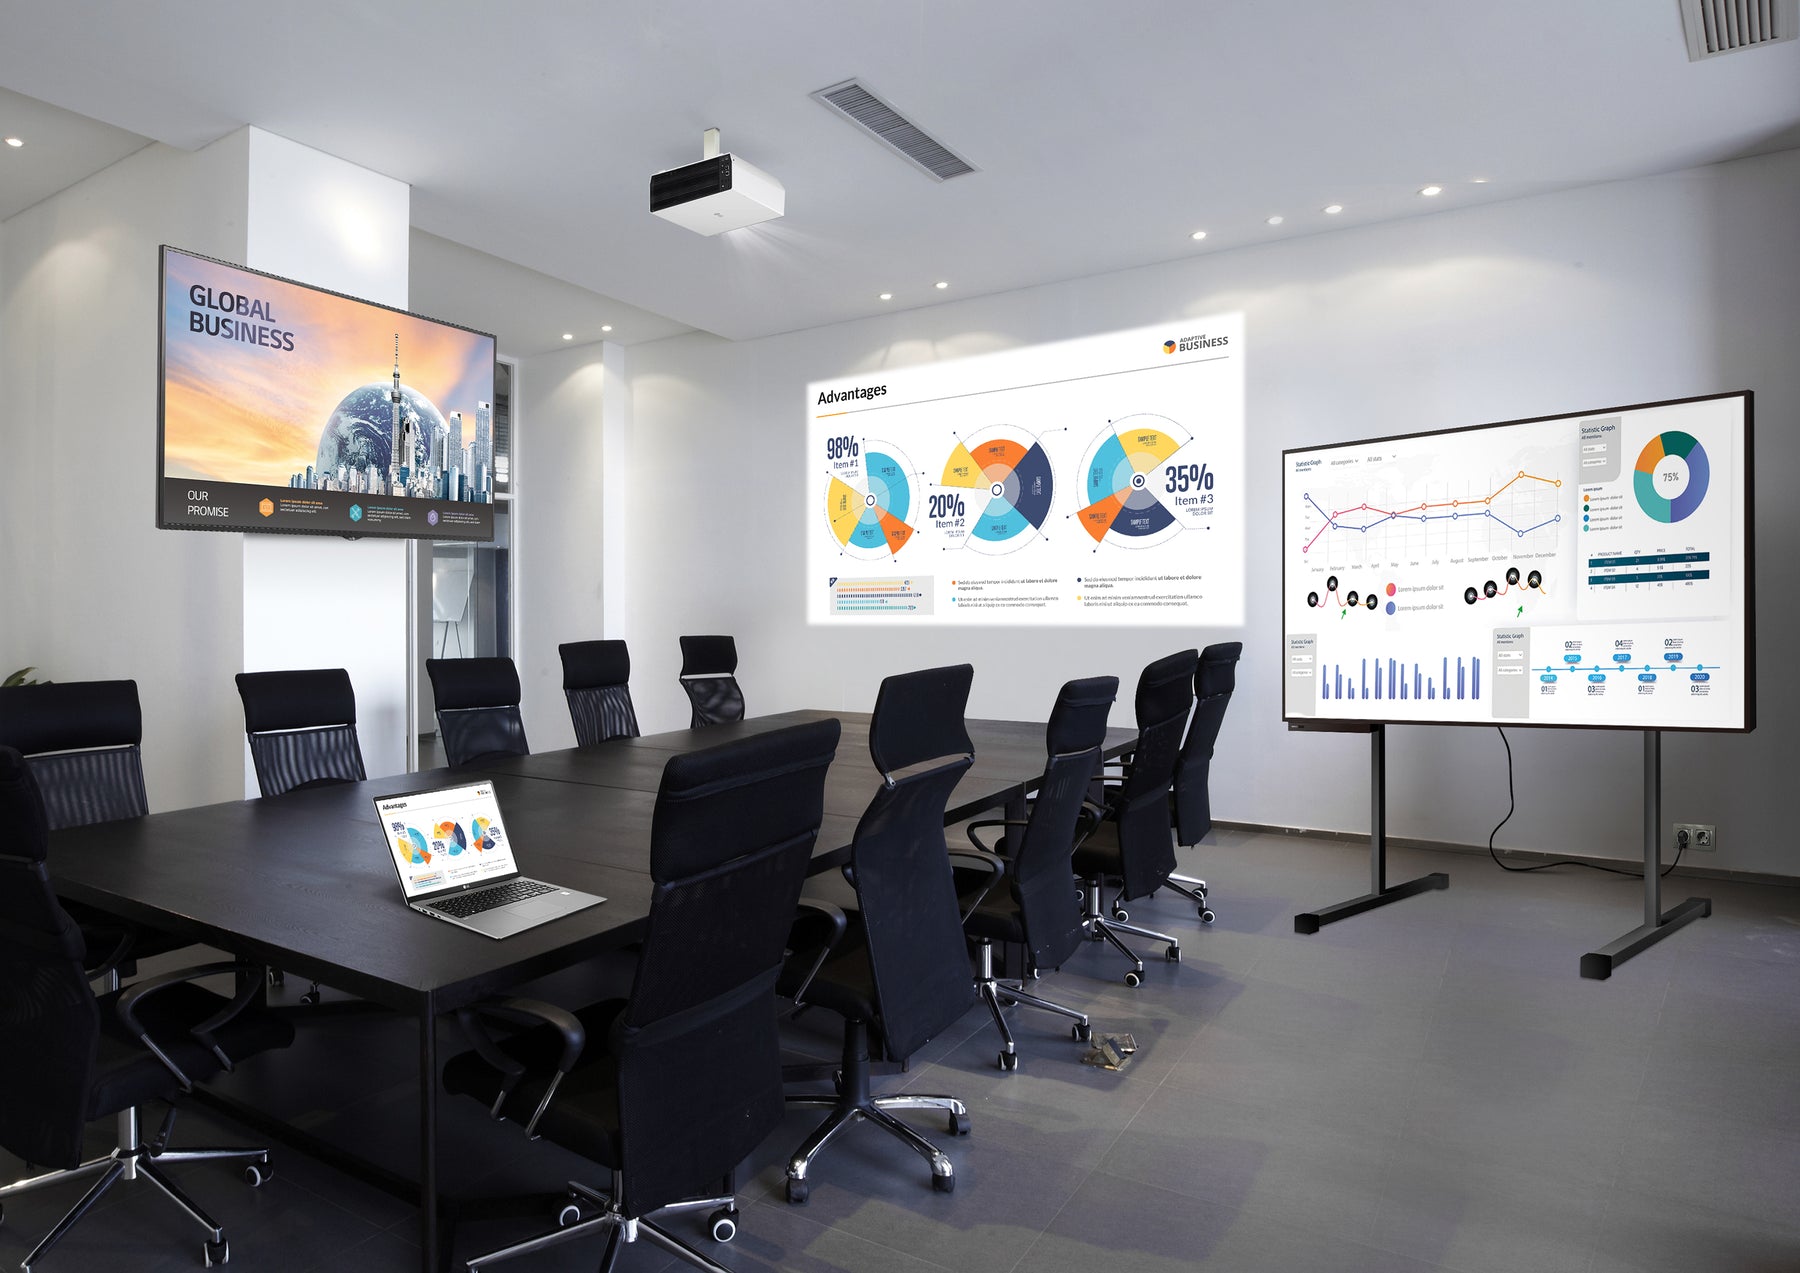 Conference room with large black conference table with black chairs. A flat screen TV is mounted on the wall showing a Global Business presentation. A PowerPoint slide is projected on the wall showing three pie charts displaying advantages. 